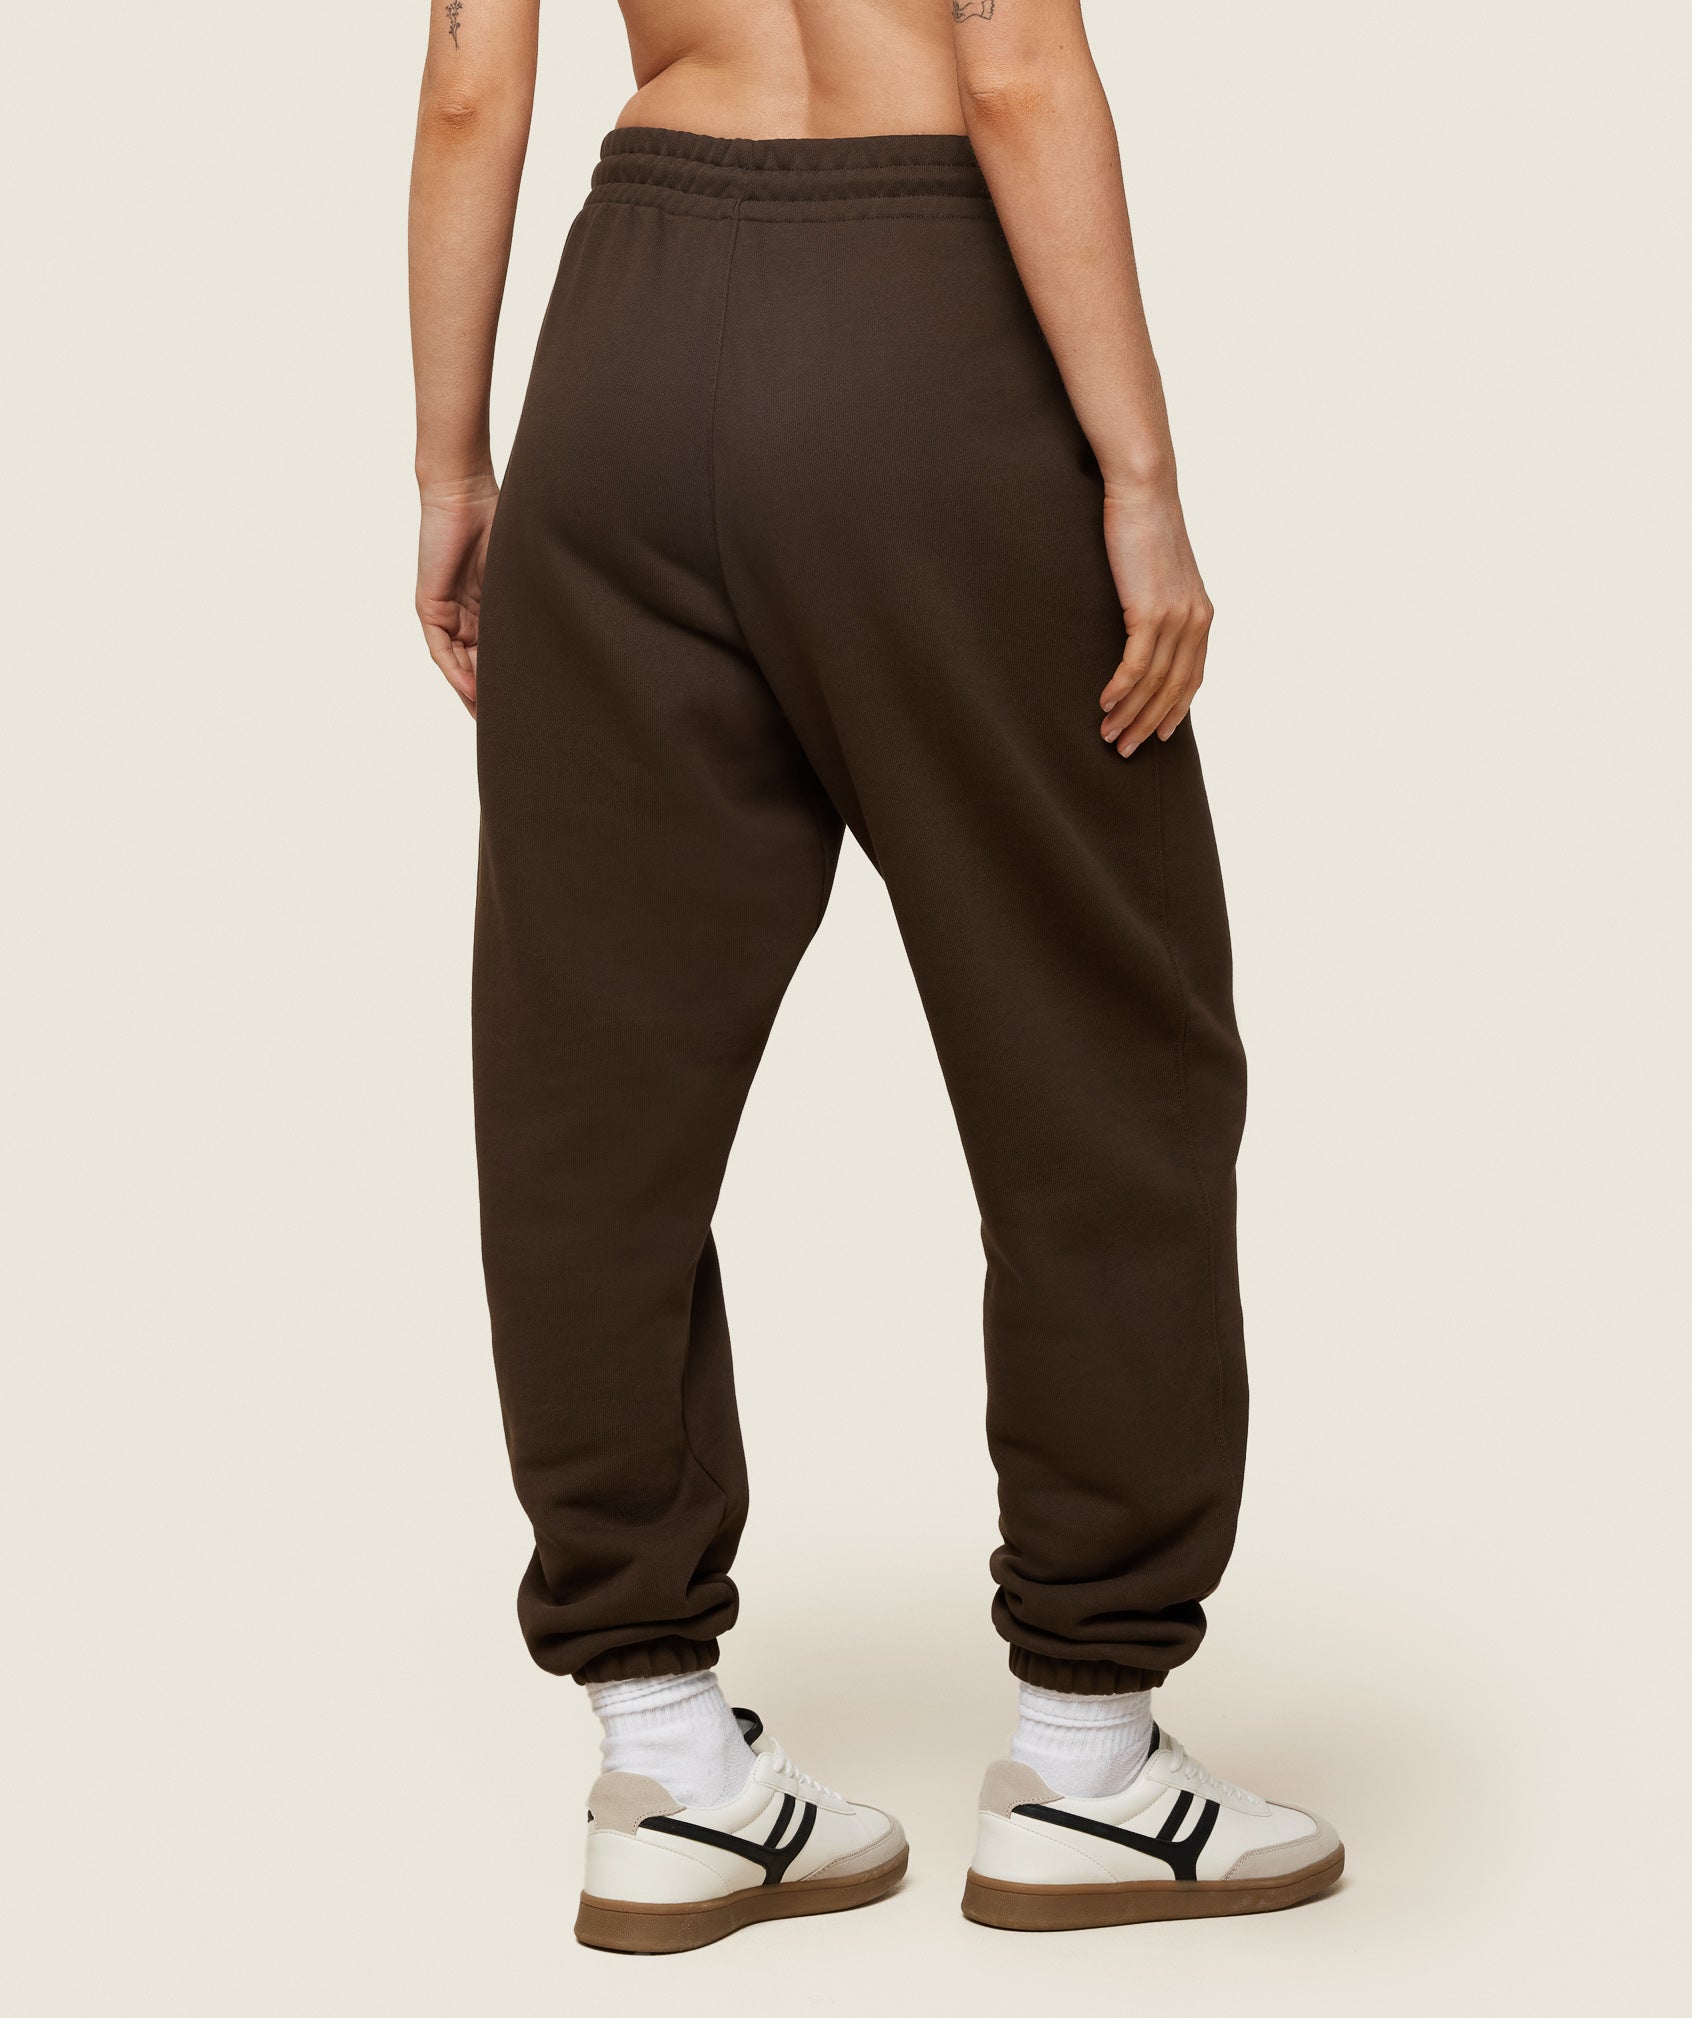 Phys Ed Graphic Sweatpants in Archive Brown - view 4